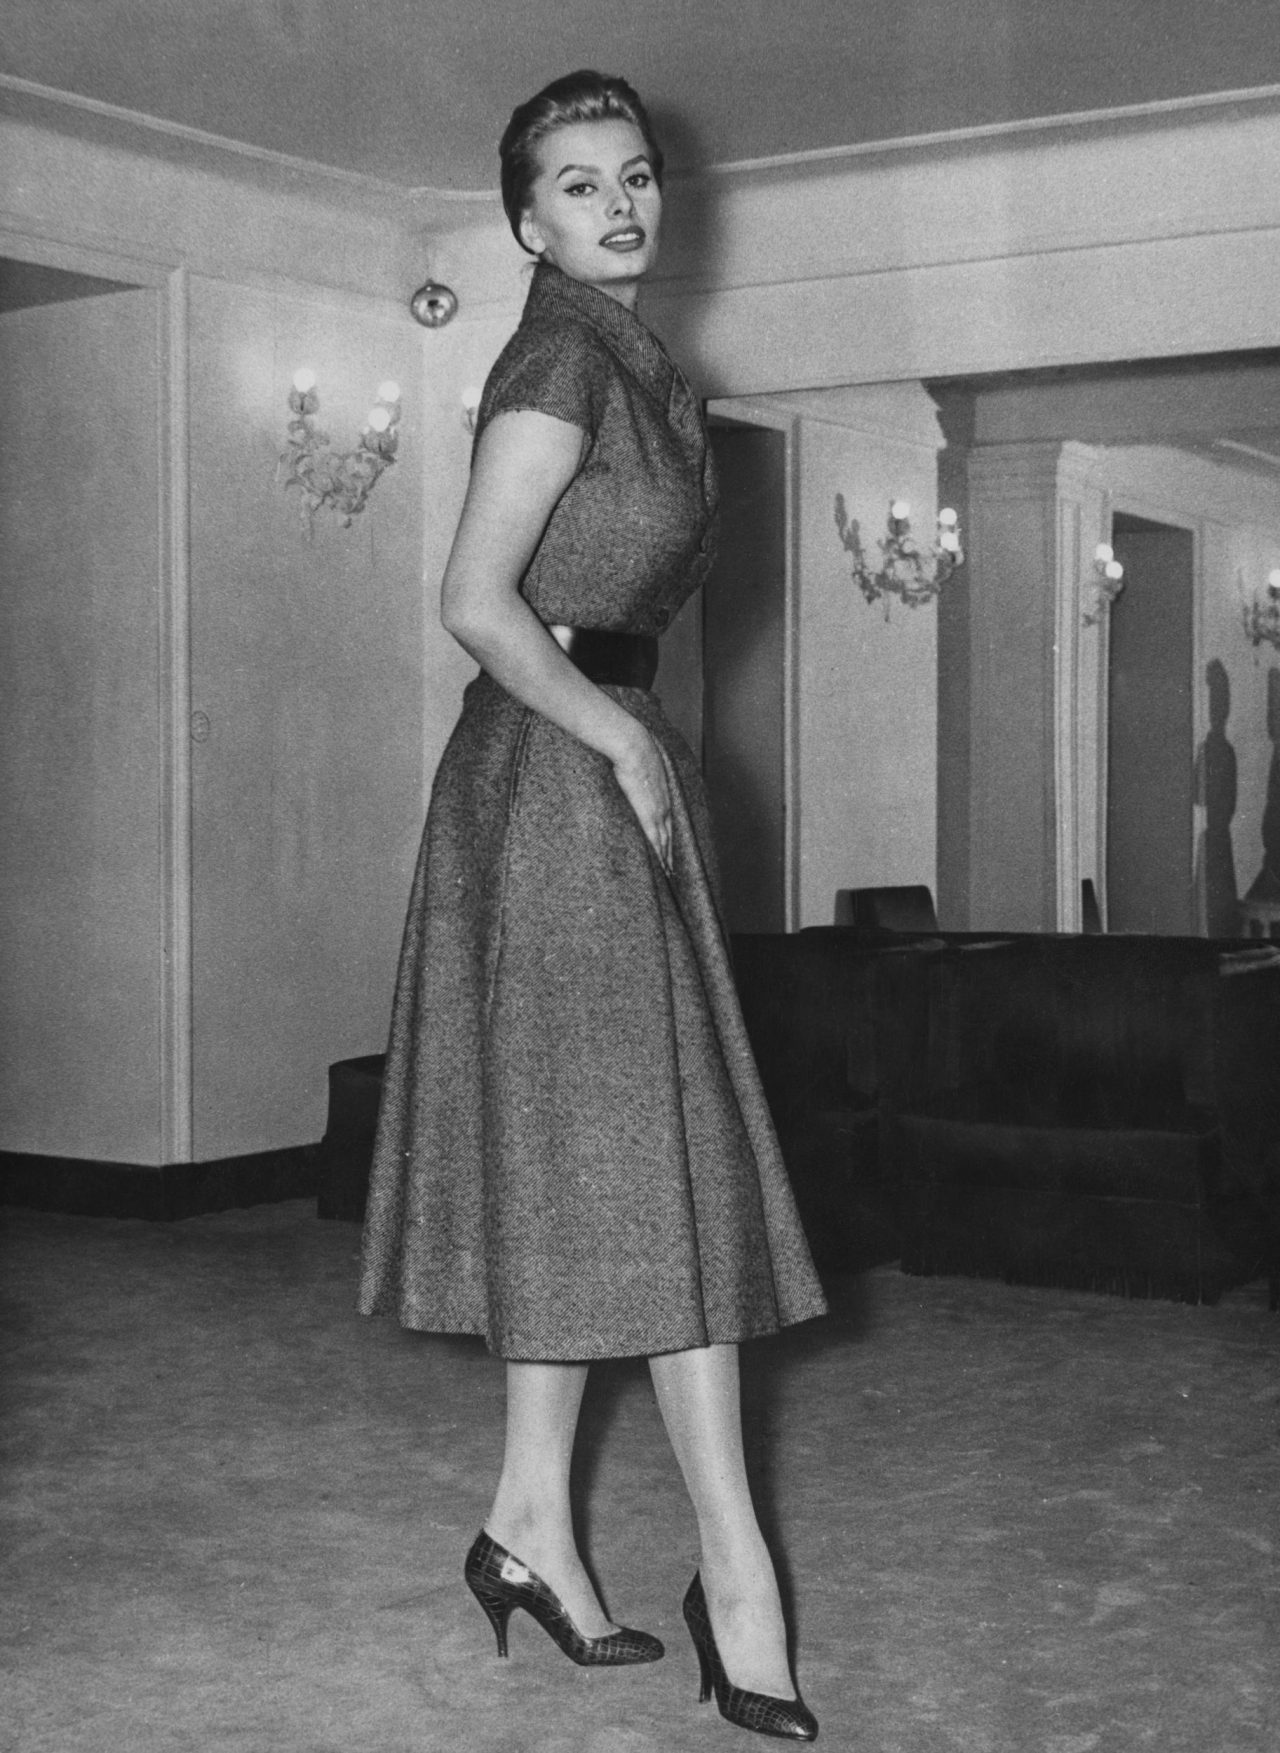 Sophia Loren in a dress made by Battilocchi of Rome, in a store in Rome, Italy on February 6, 1956